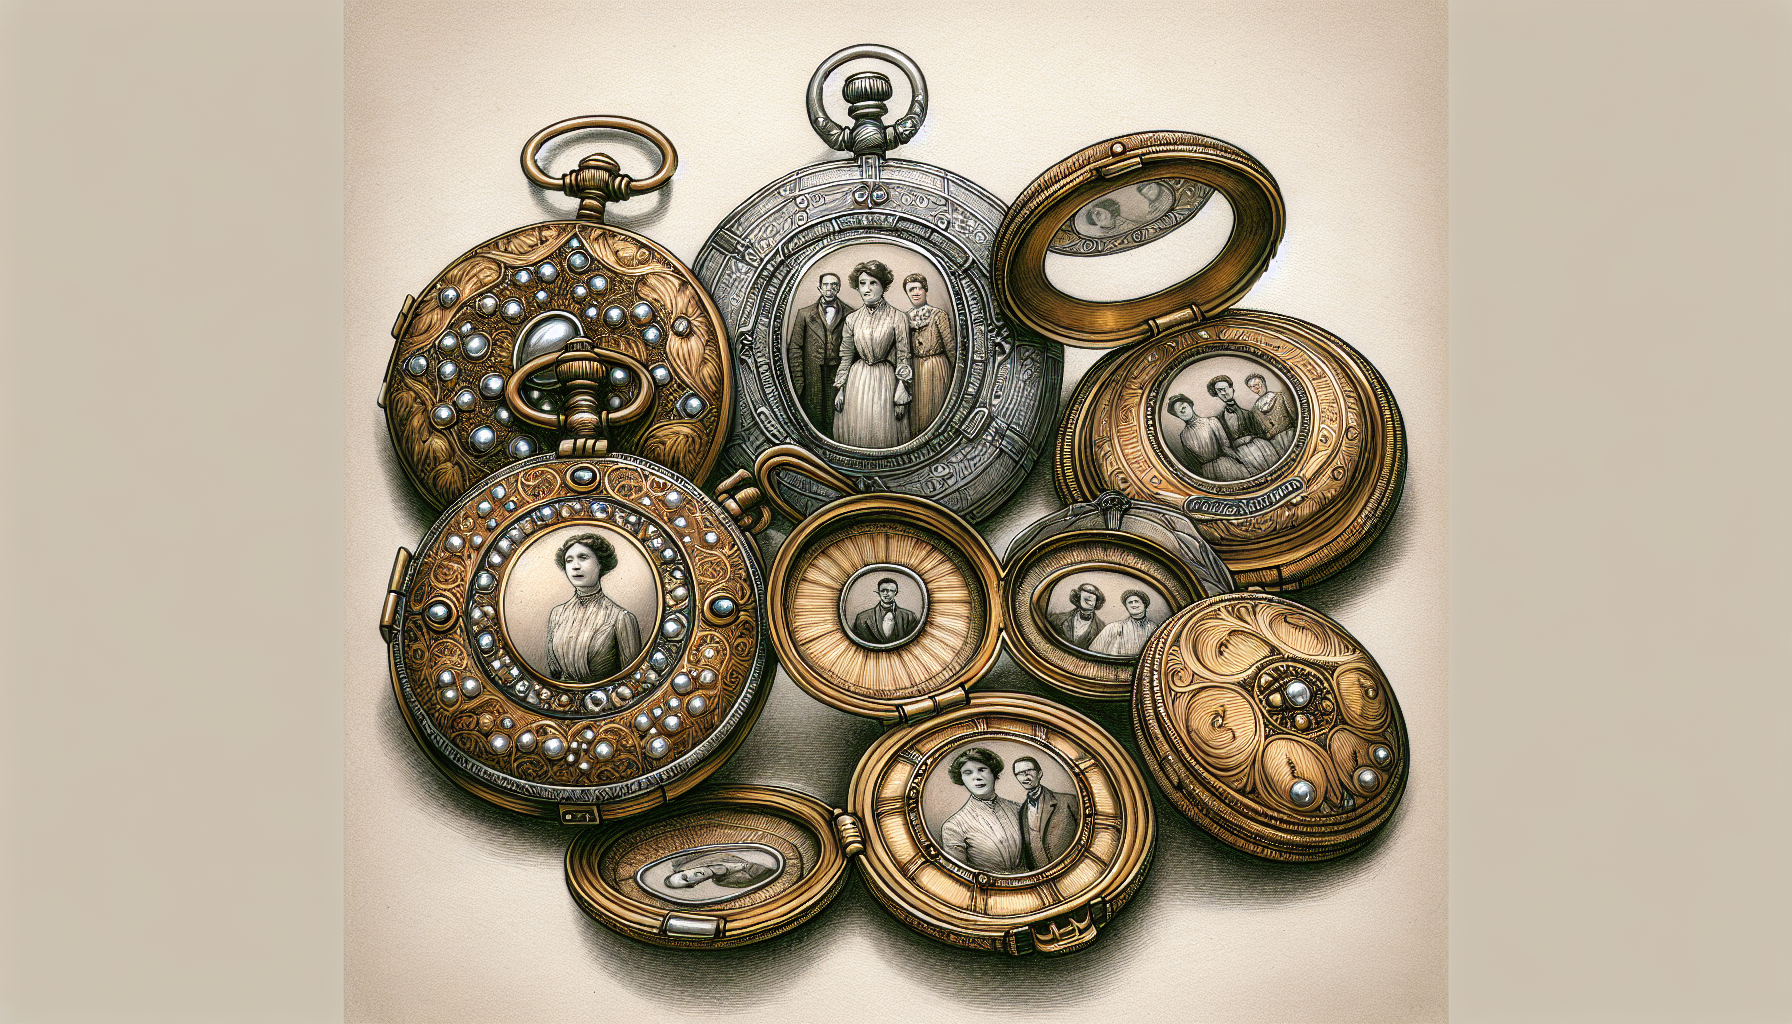 An illustrative depiction of vintage lockets, finely crafted from ornate gold and silver. Inside each locket, there is a small sepia-toned photograph, gently faded with time, a cherished memory kept c